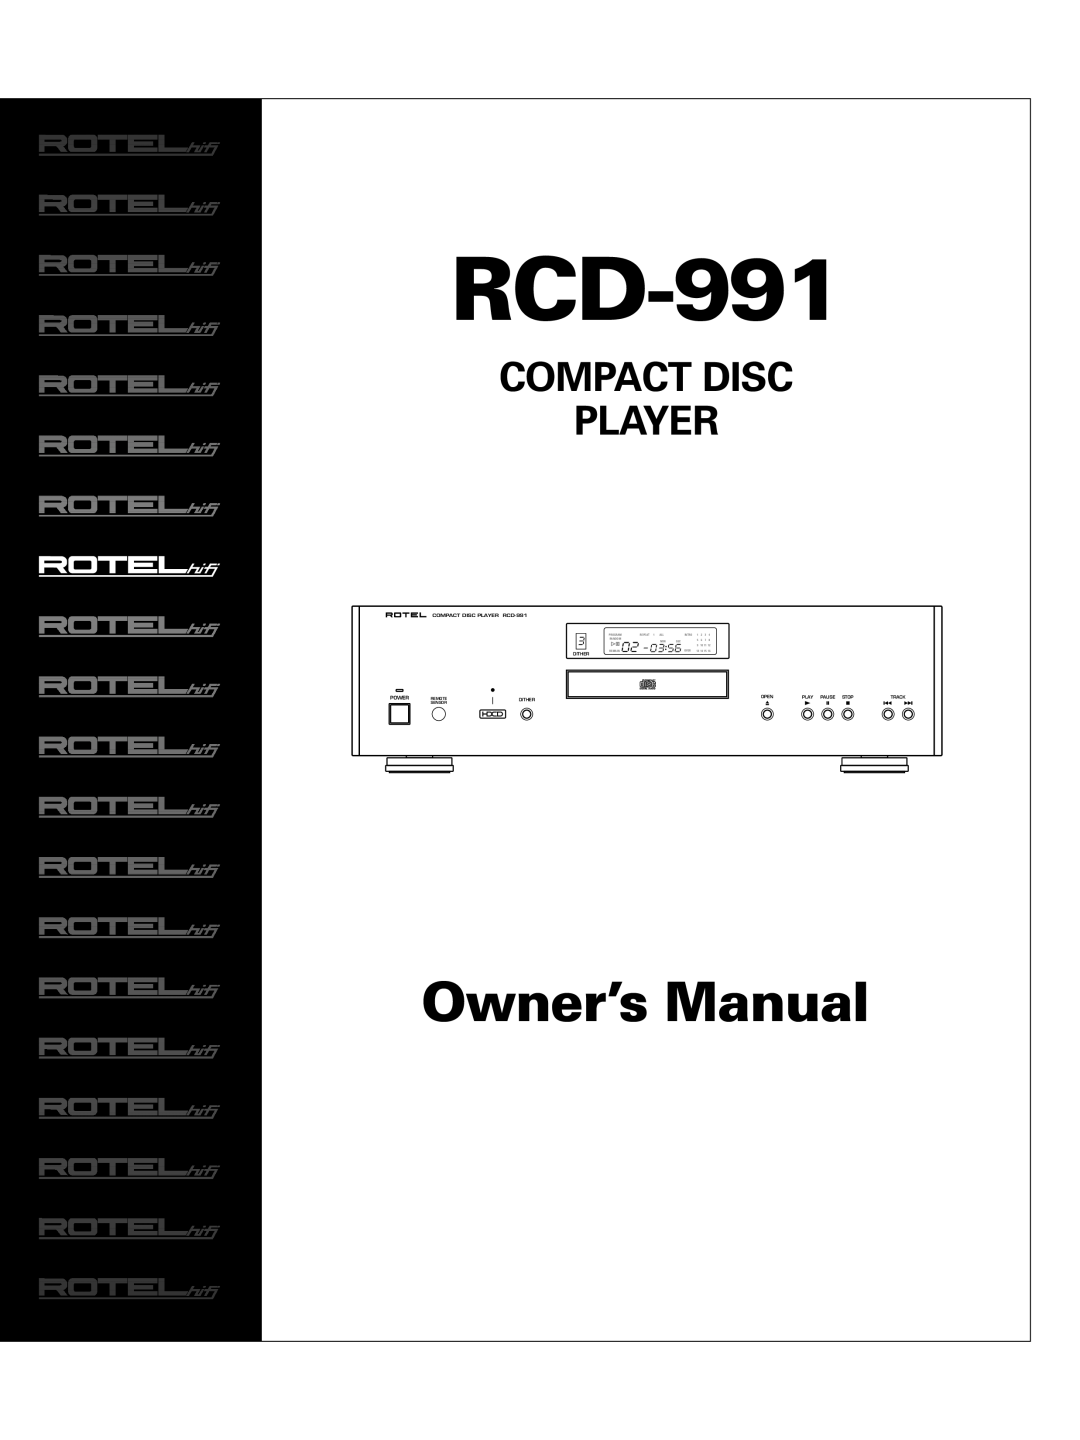 Rotel owner manual Compact Disc Player, COMPACT DISC PLAYER RCD-991, Remote, Dither, Sensor, Open, Play Pause Stop 